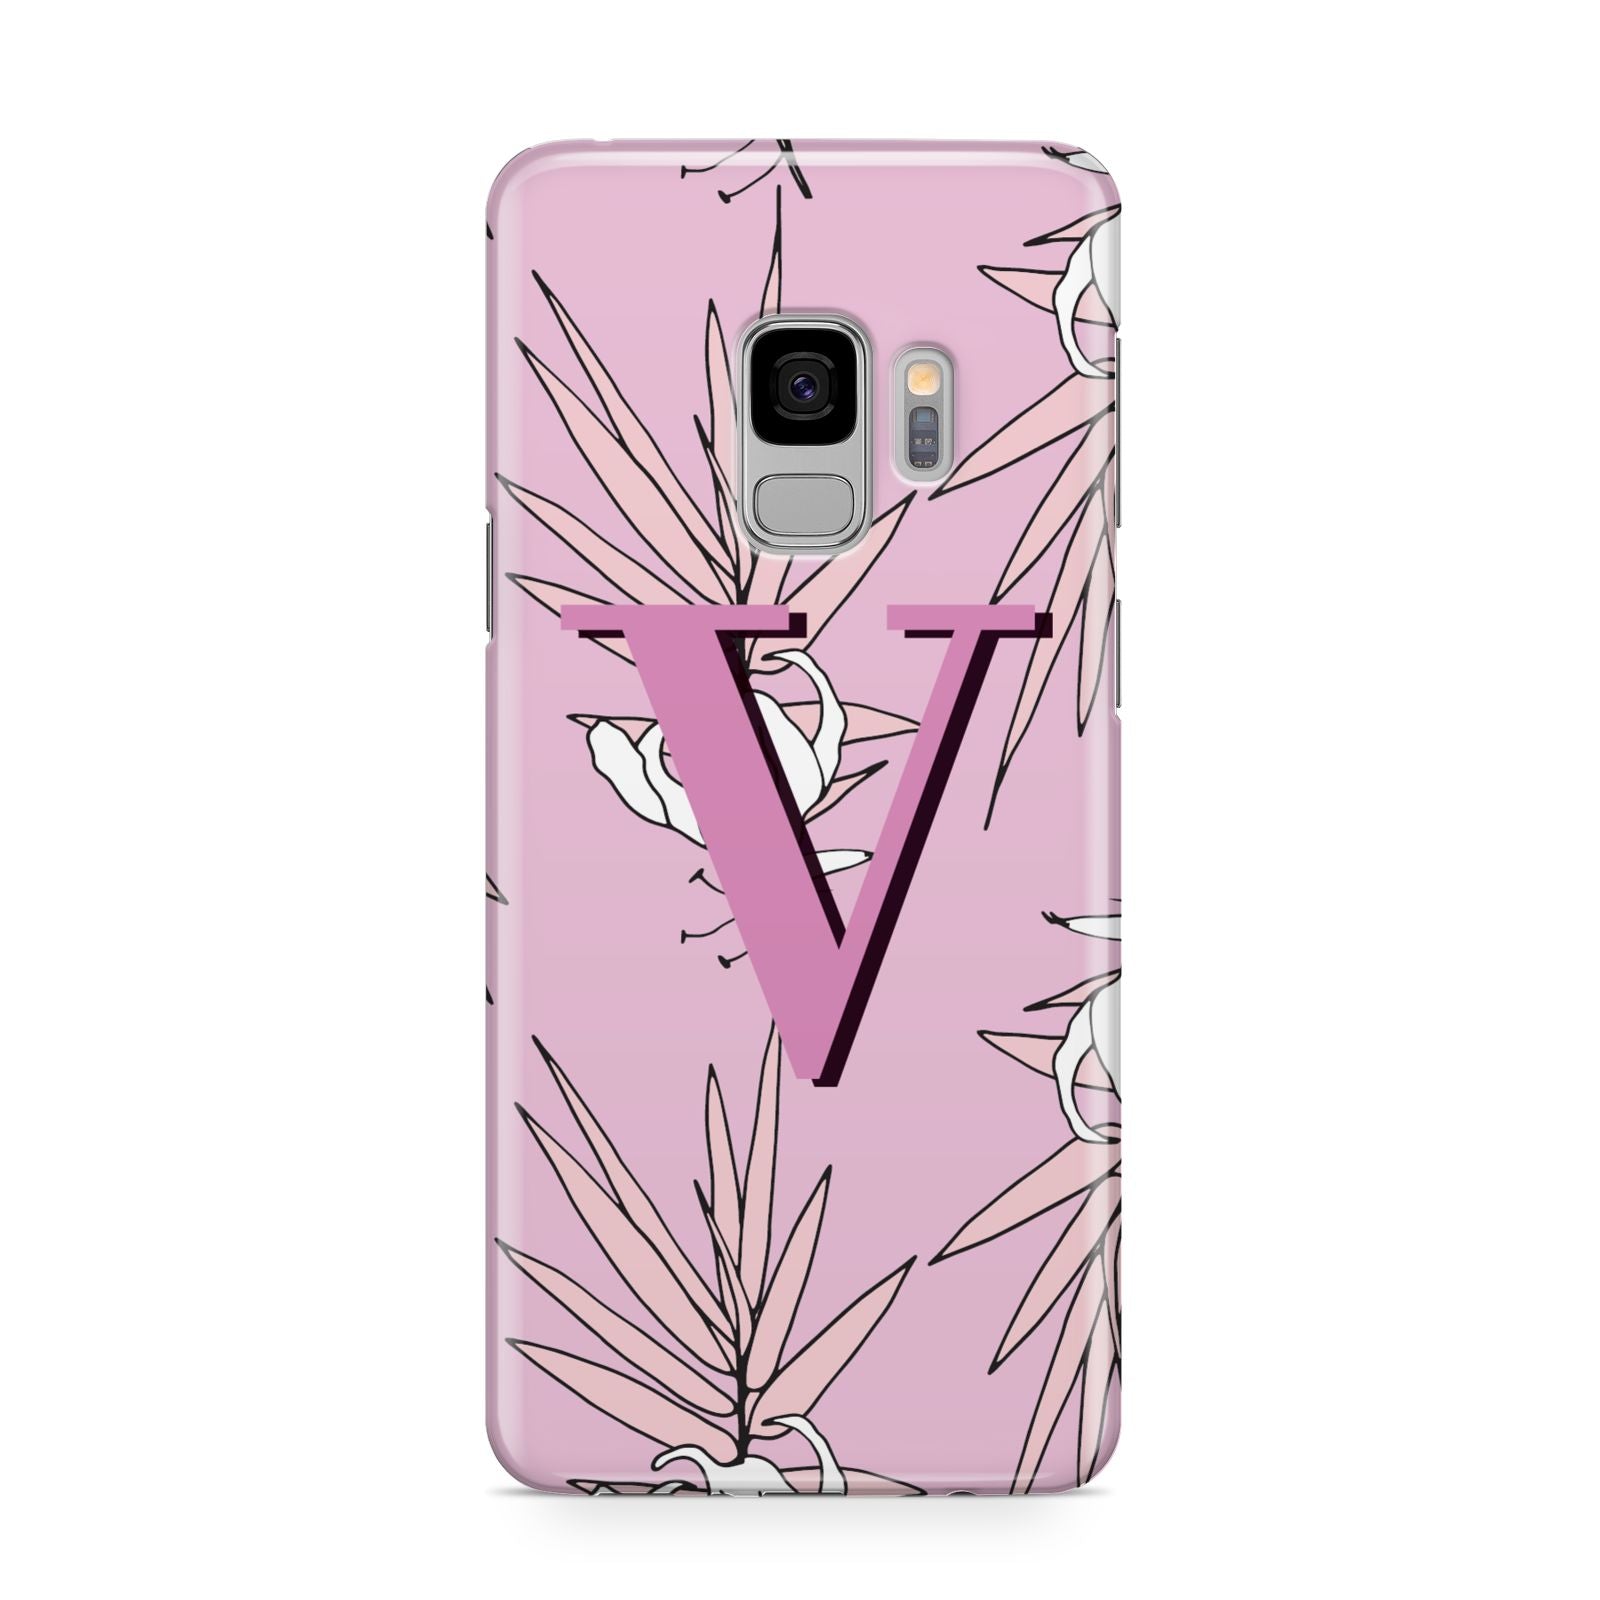 Personalised Pink and White Floral Monogram Samsung Galaxy S9 Case